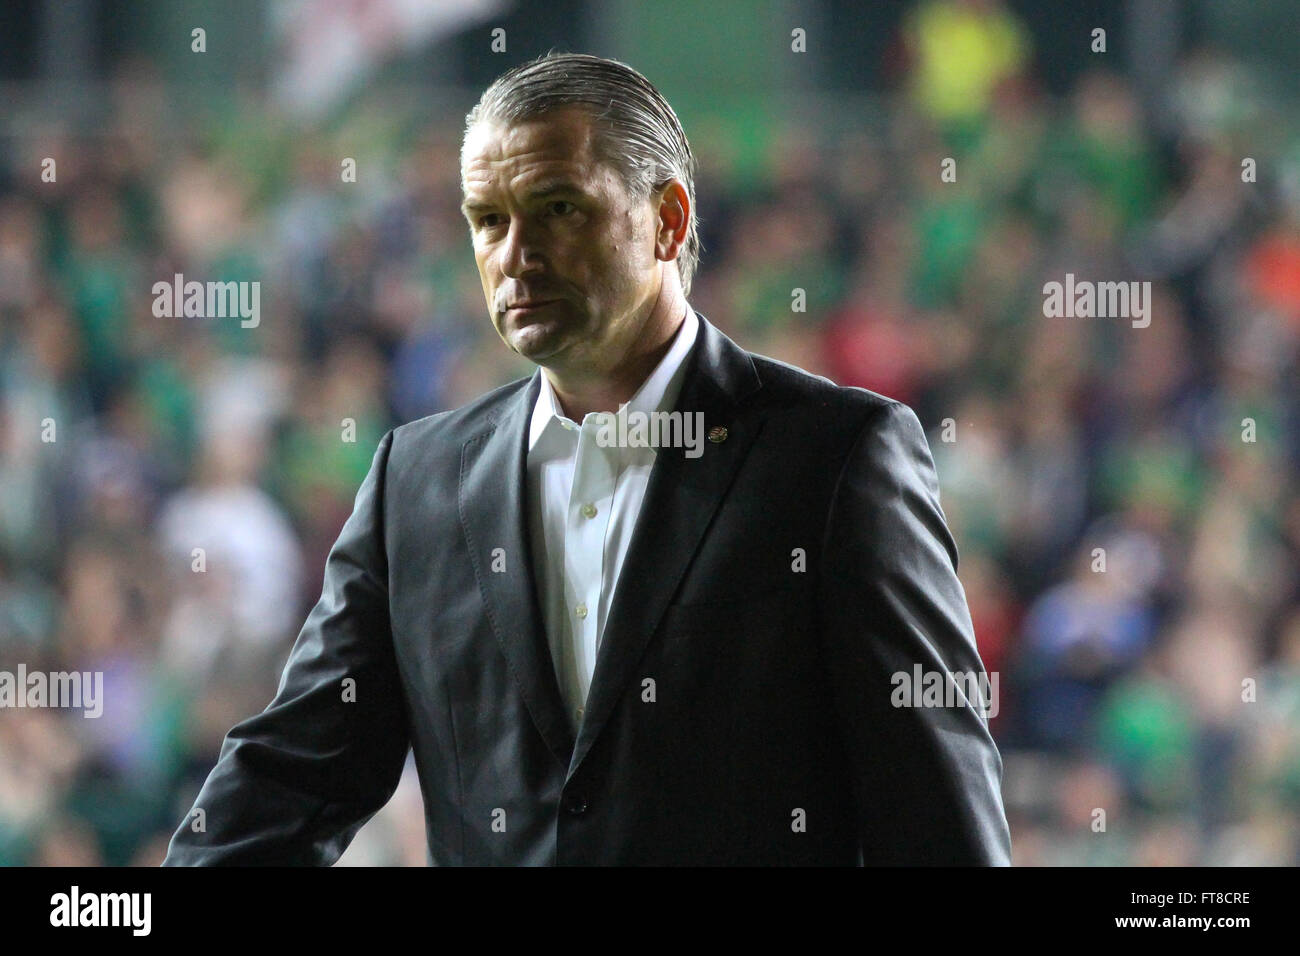 07 Sept 2015 - Euro 2016 Qualifier - Group F - Northern Ireland 1 Hungary 1. Hungary's manager Bernd Storck reflects on the draw as he leaves the pitch. Stock Photo